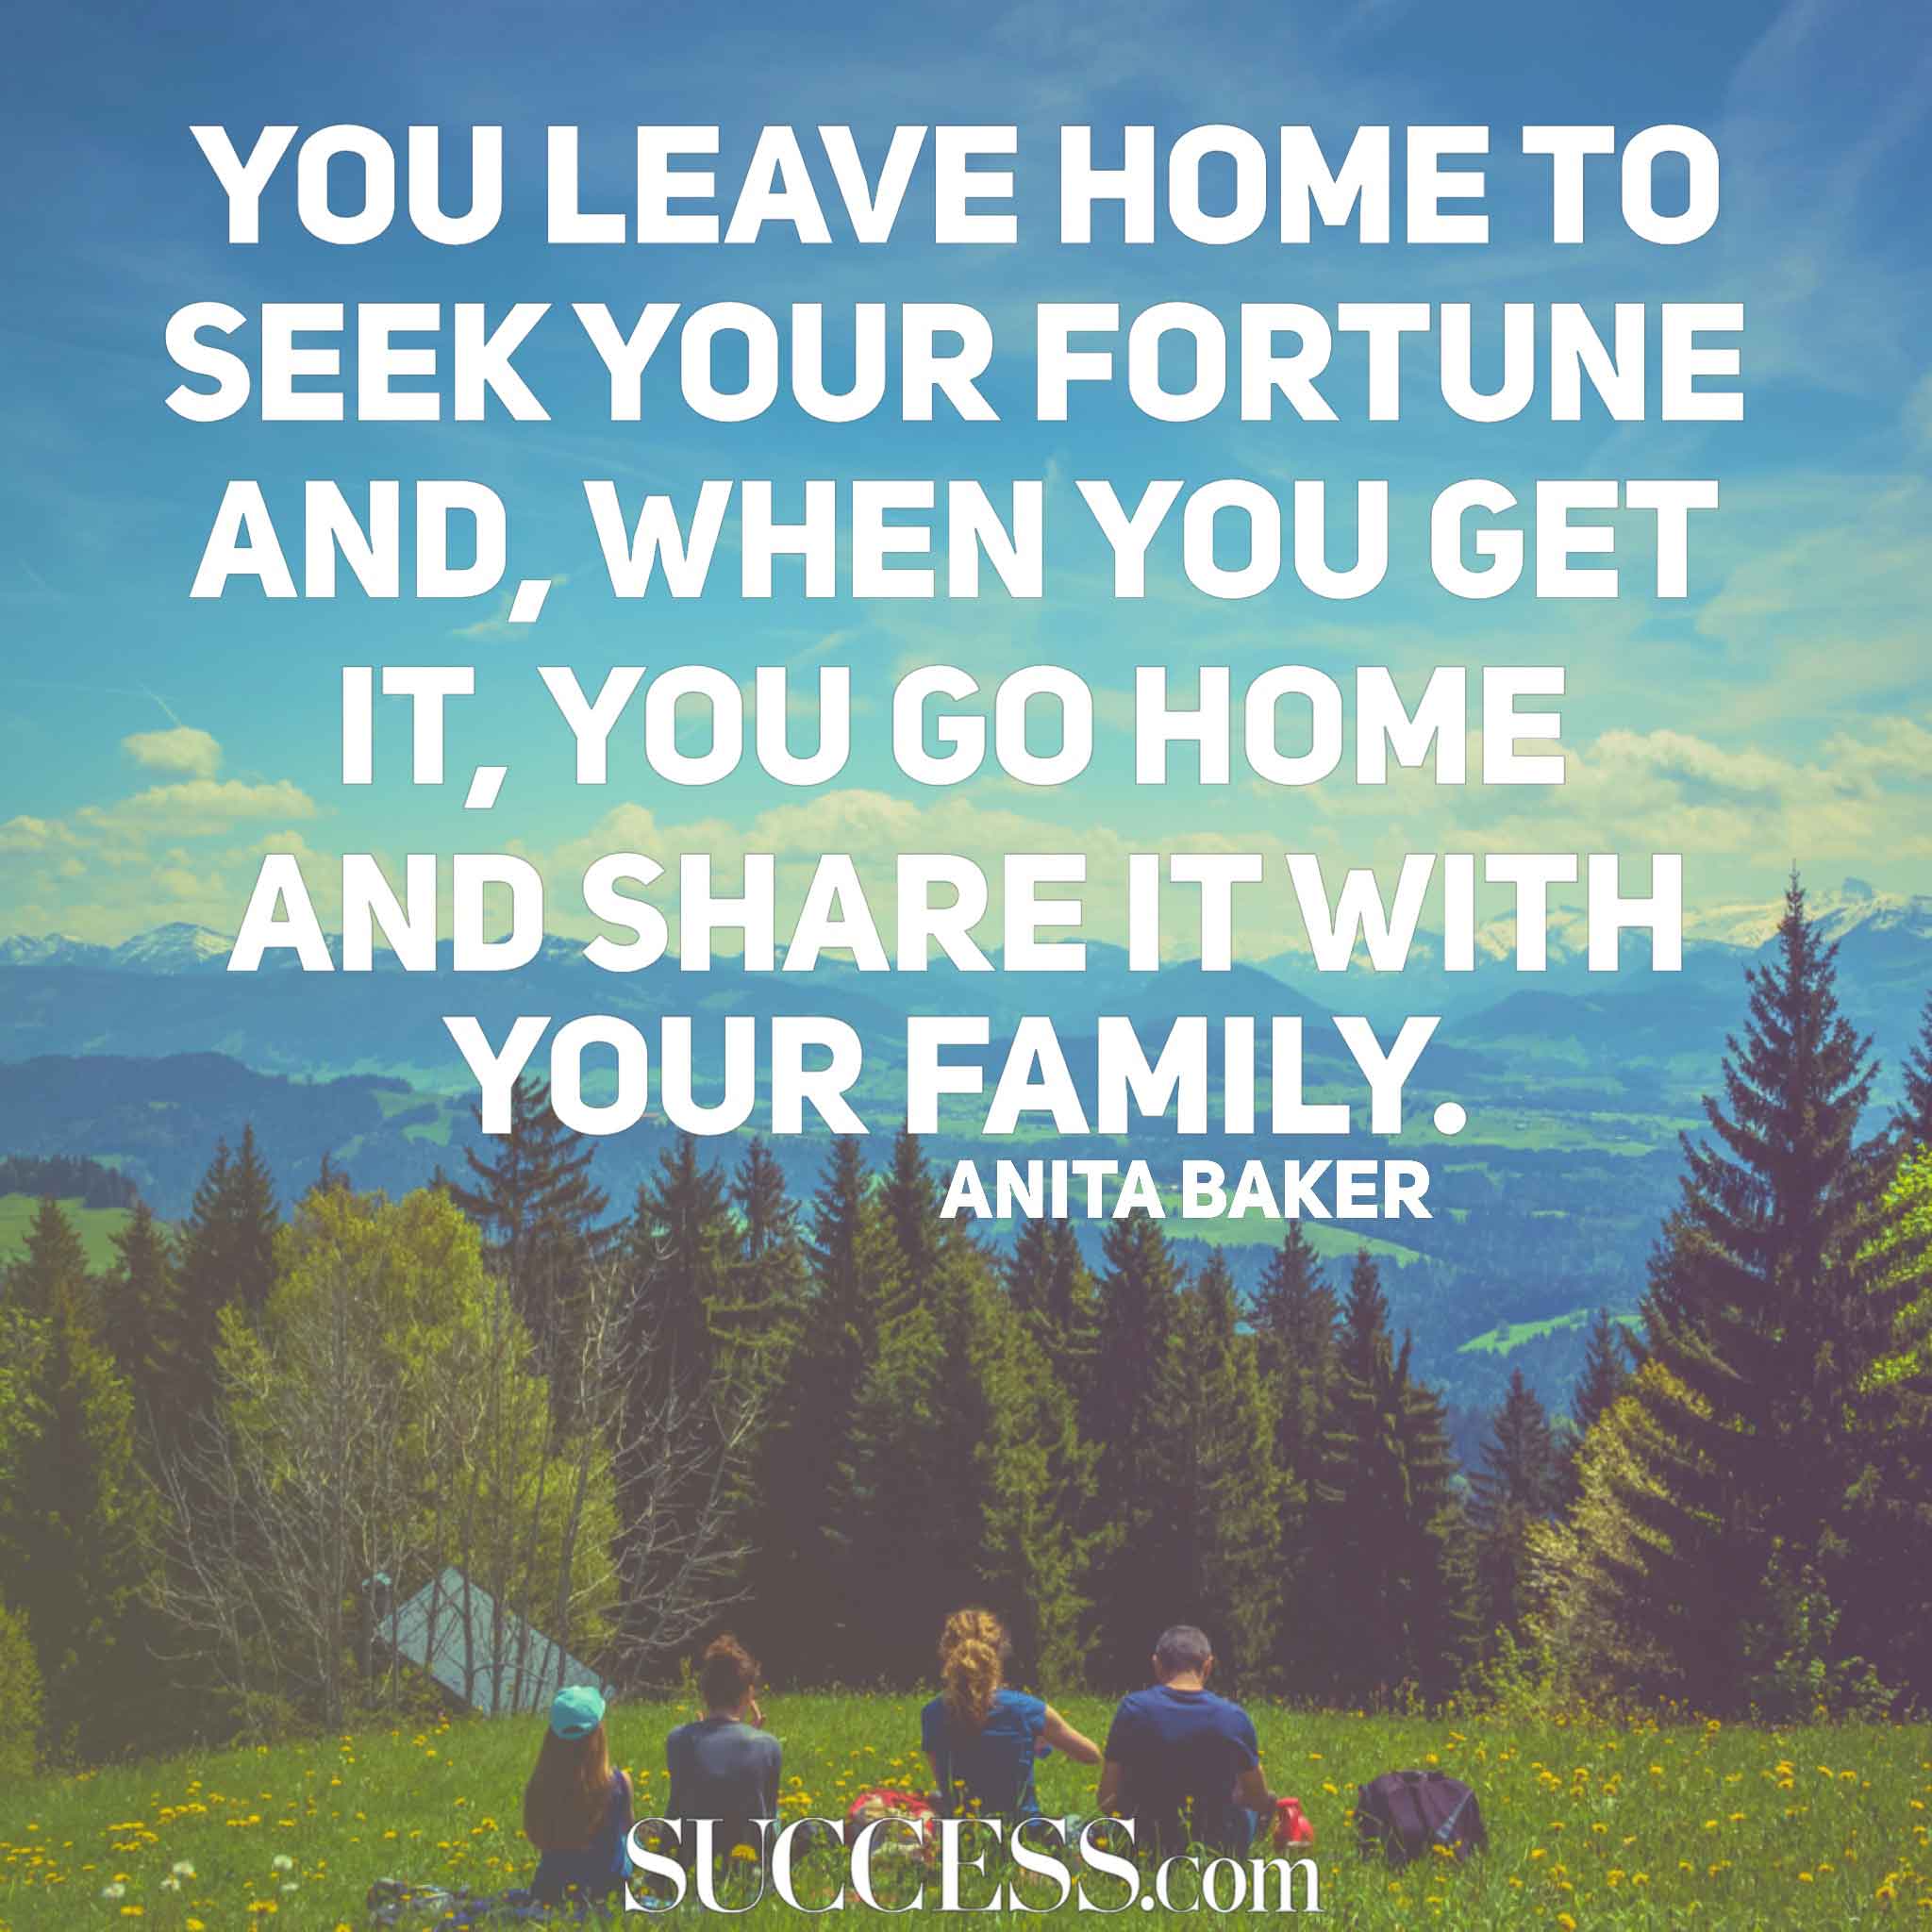 You leave home to seek your fortune and, when you get it, you go home and share it with your family. Anita Baker